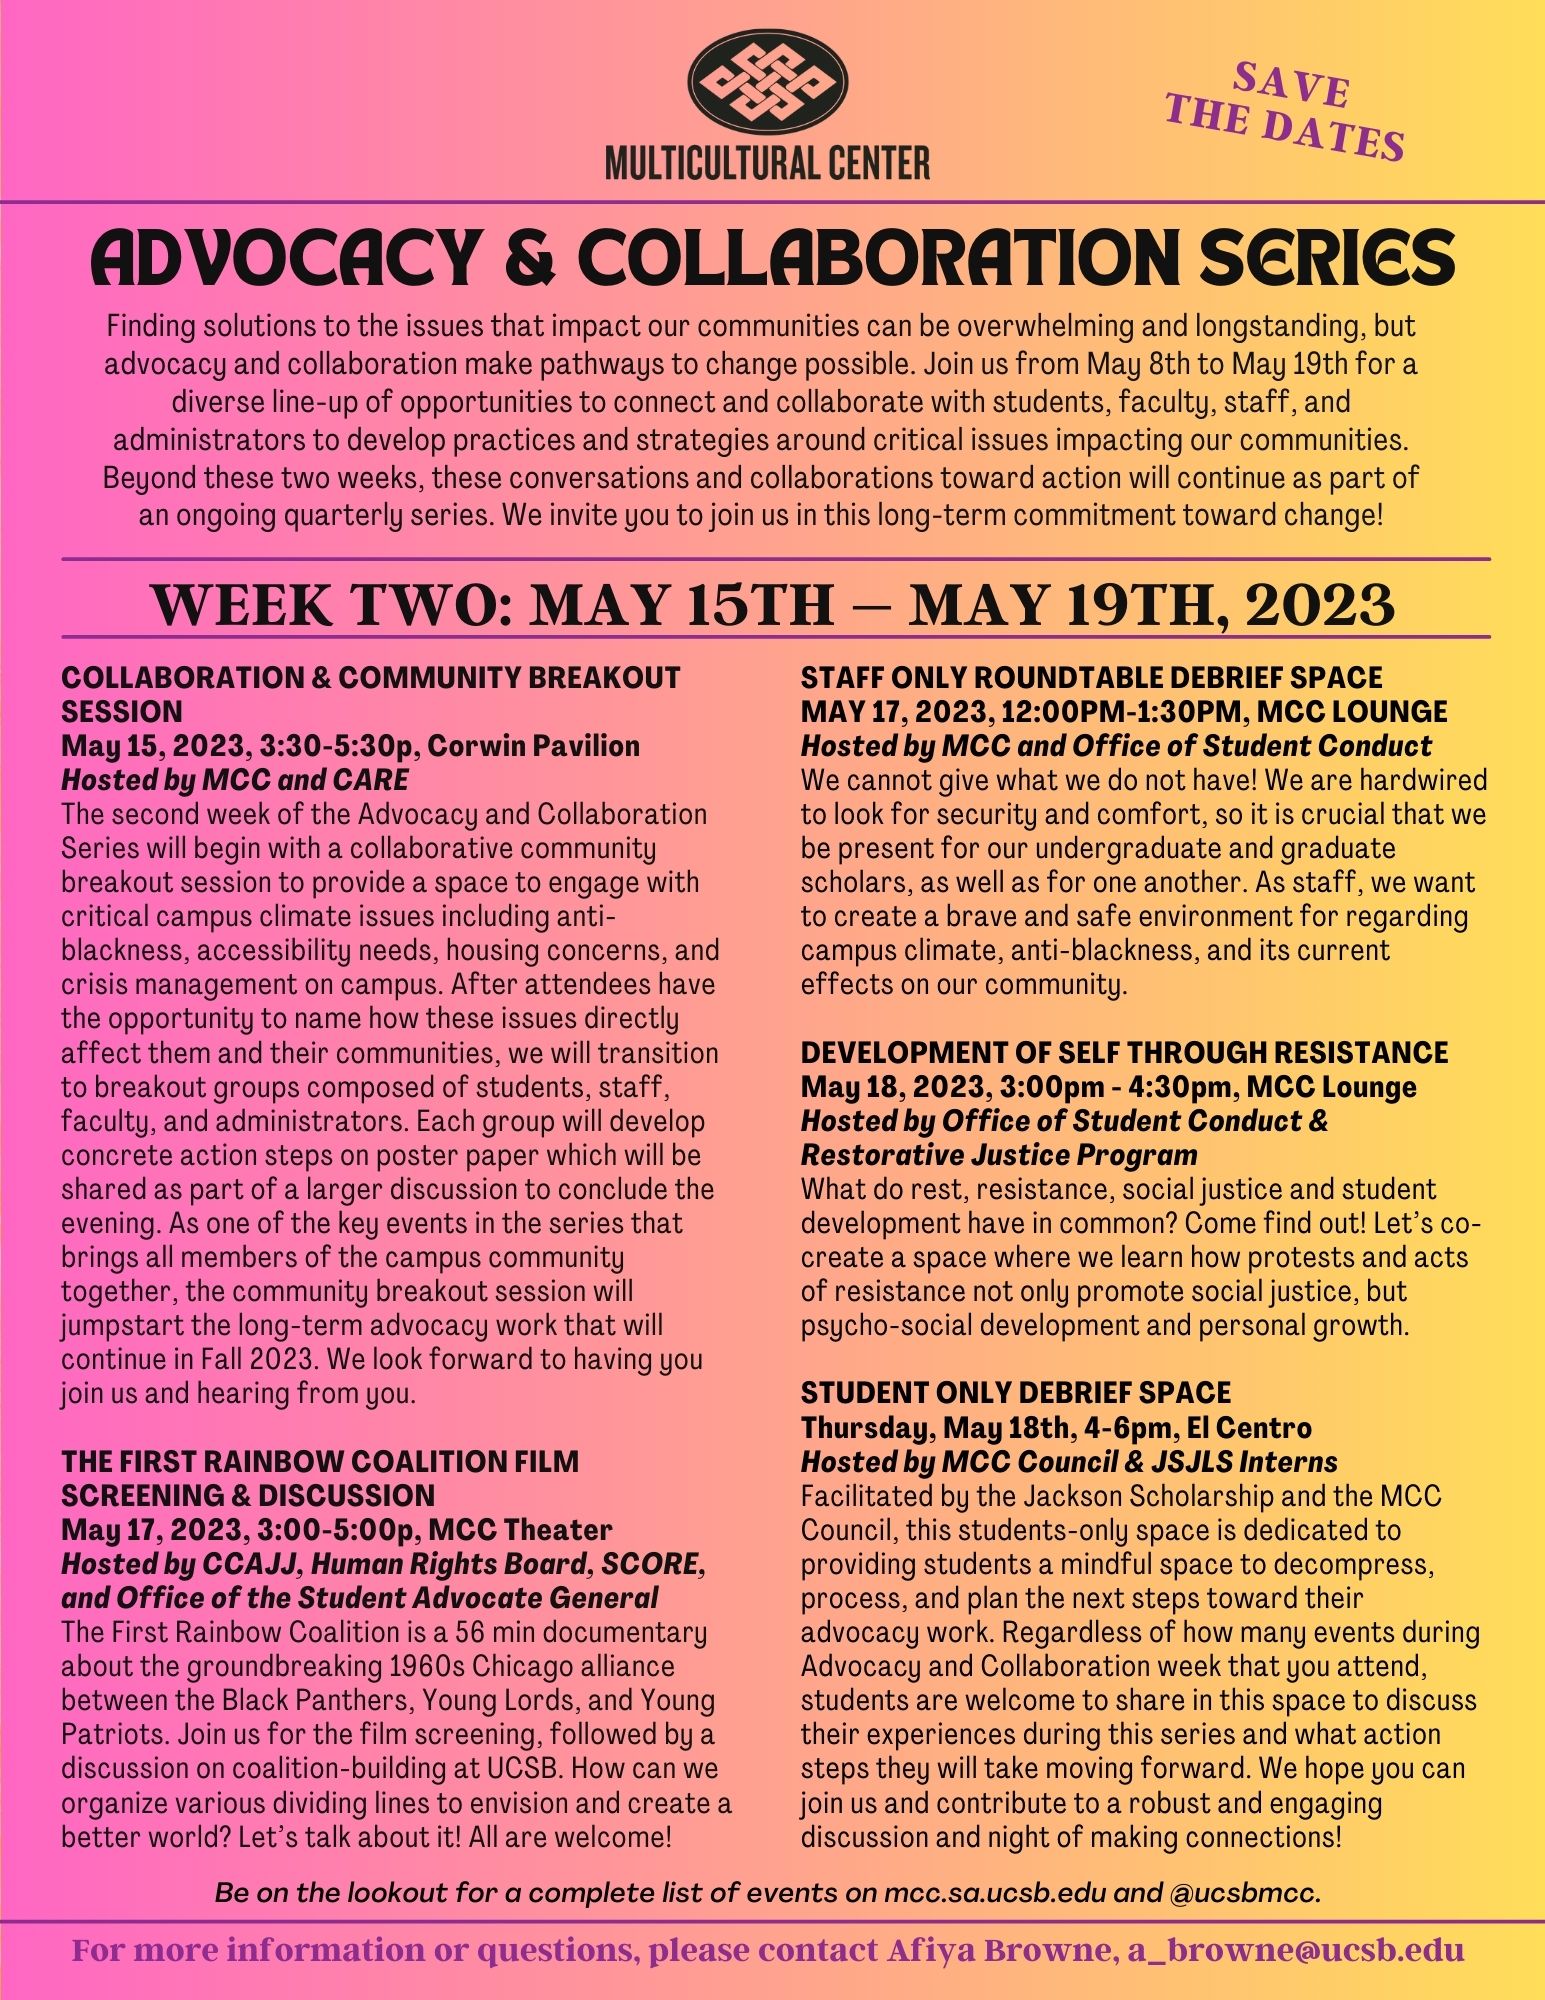 Advocacy and Collaboration